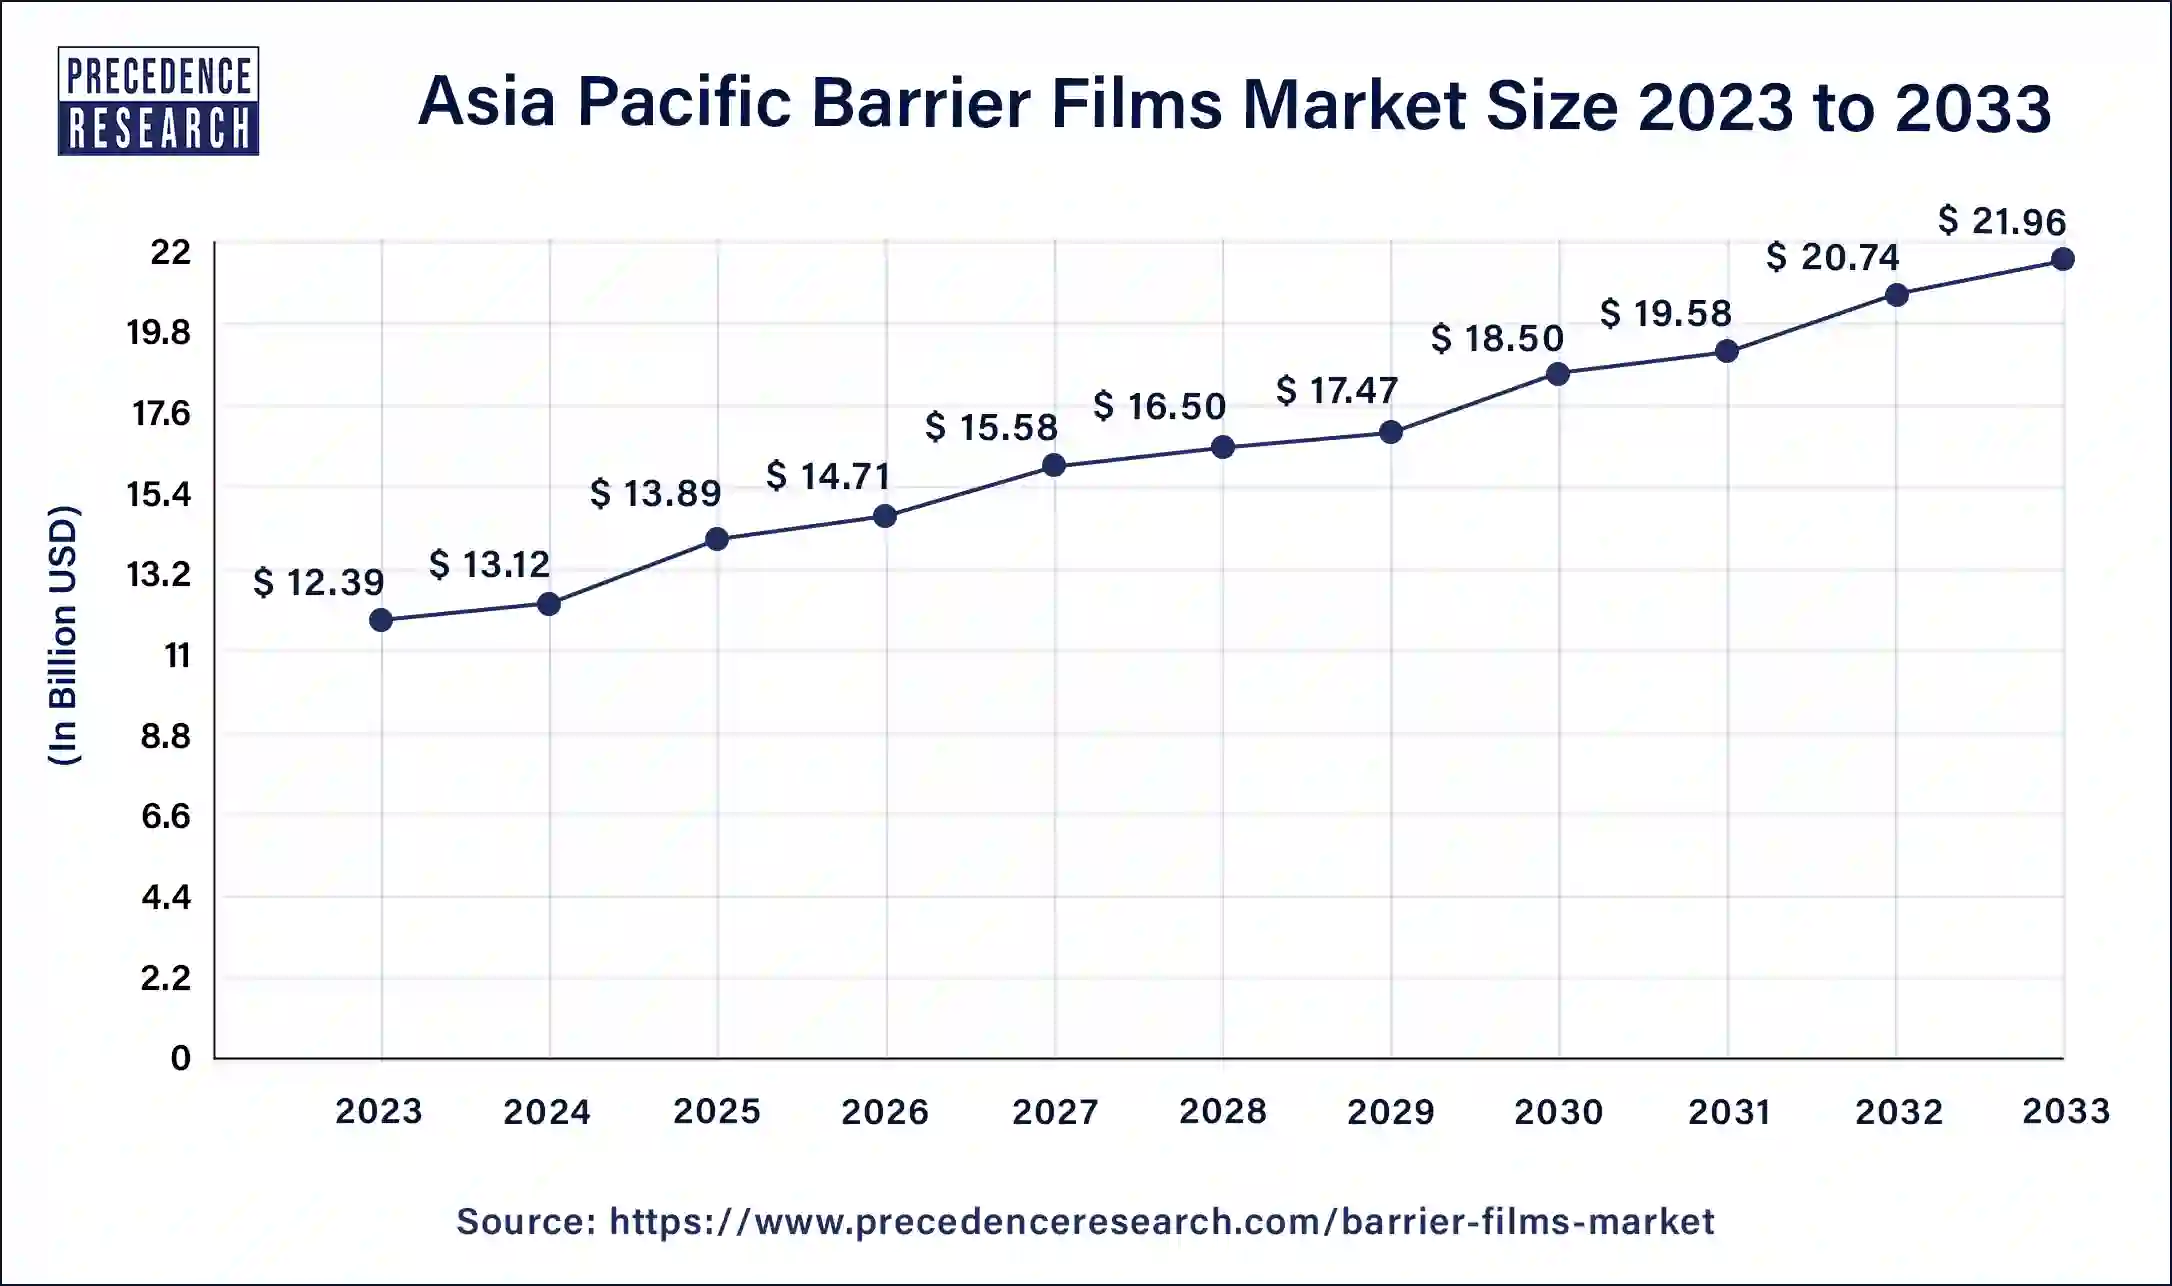 Asia Pacific Barrier Films Market Size 2024 to 2033